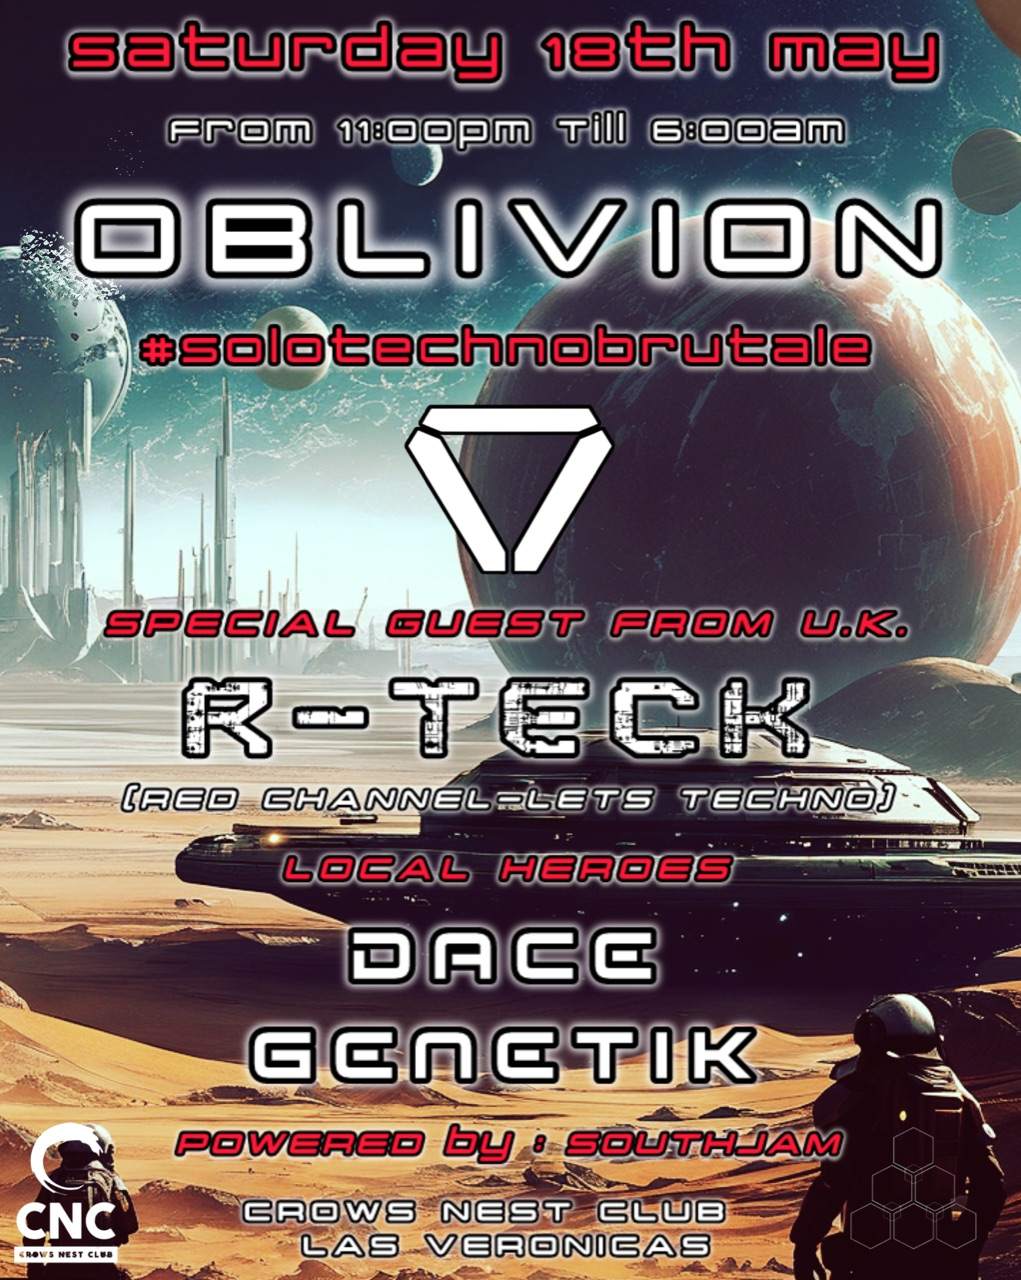 RTECK x OBLIVION #solotechnobrutale - フライヤー表